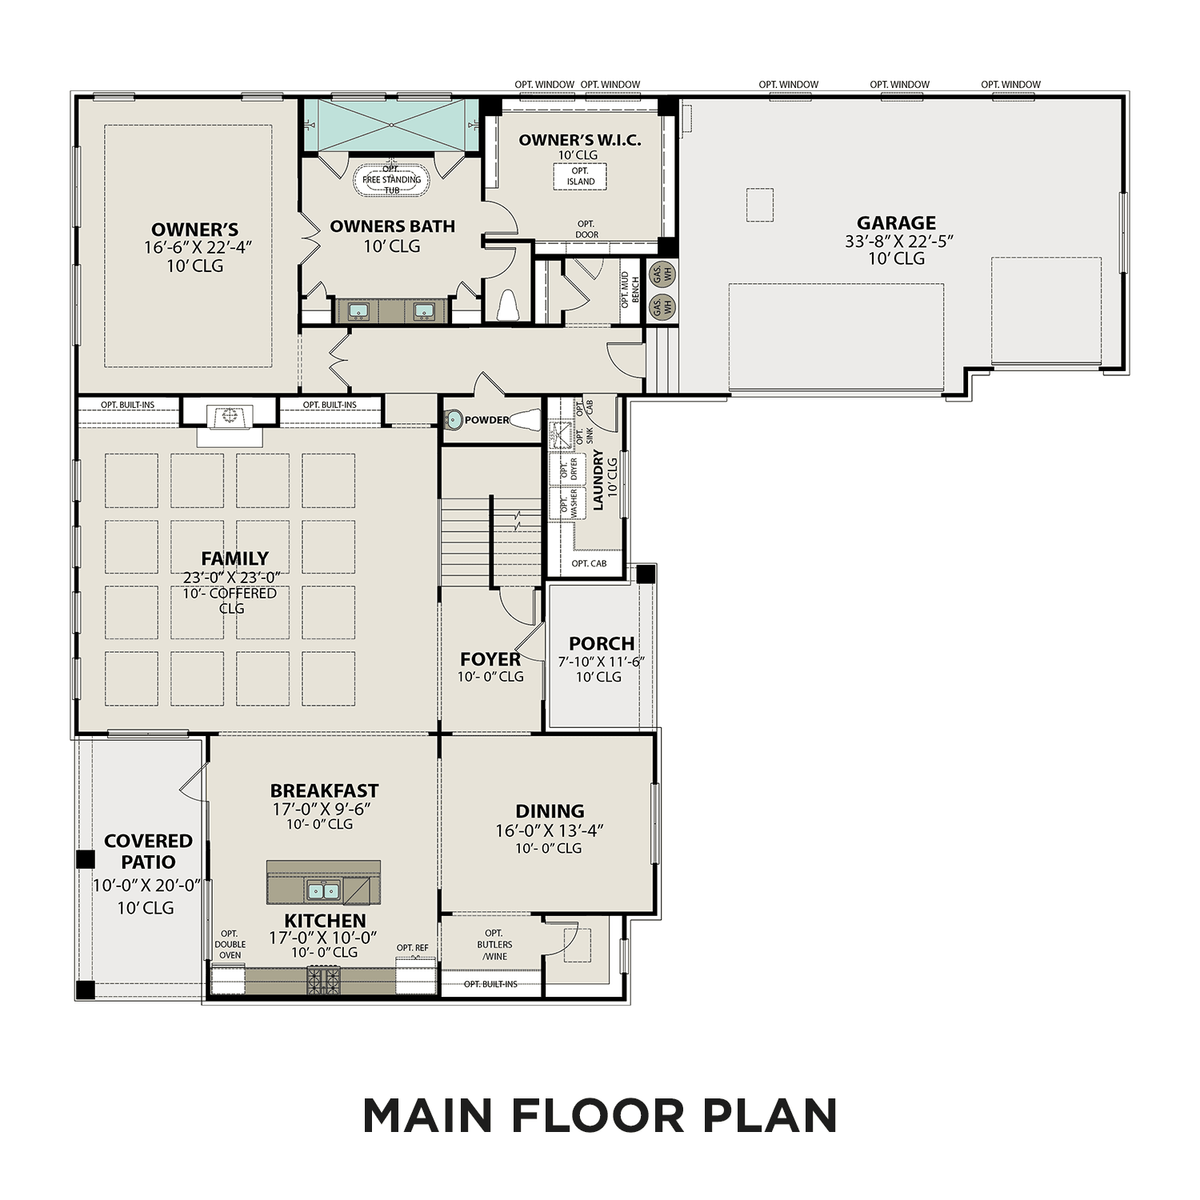 1 - The Bledsoe A buildable floor plan layout in Davidson Homes' Shelton Square community.